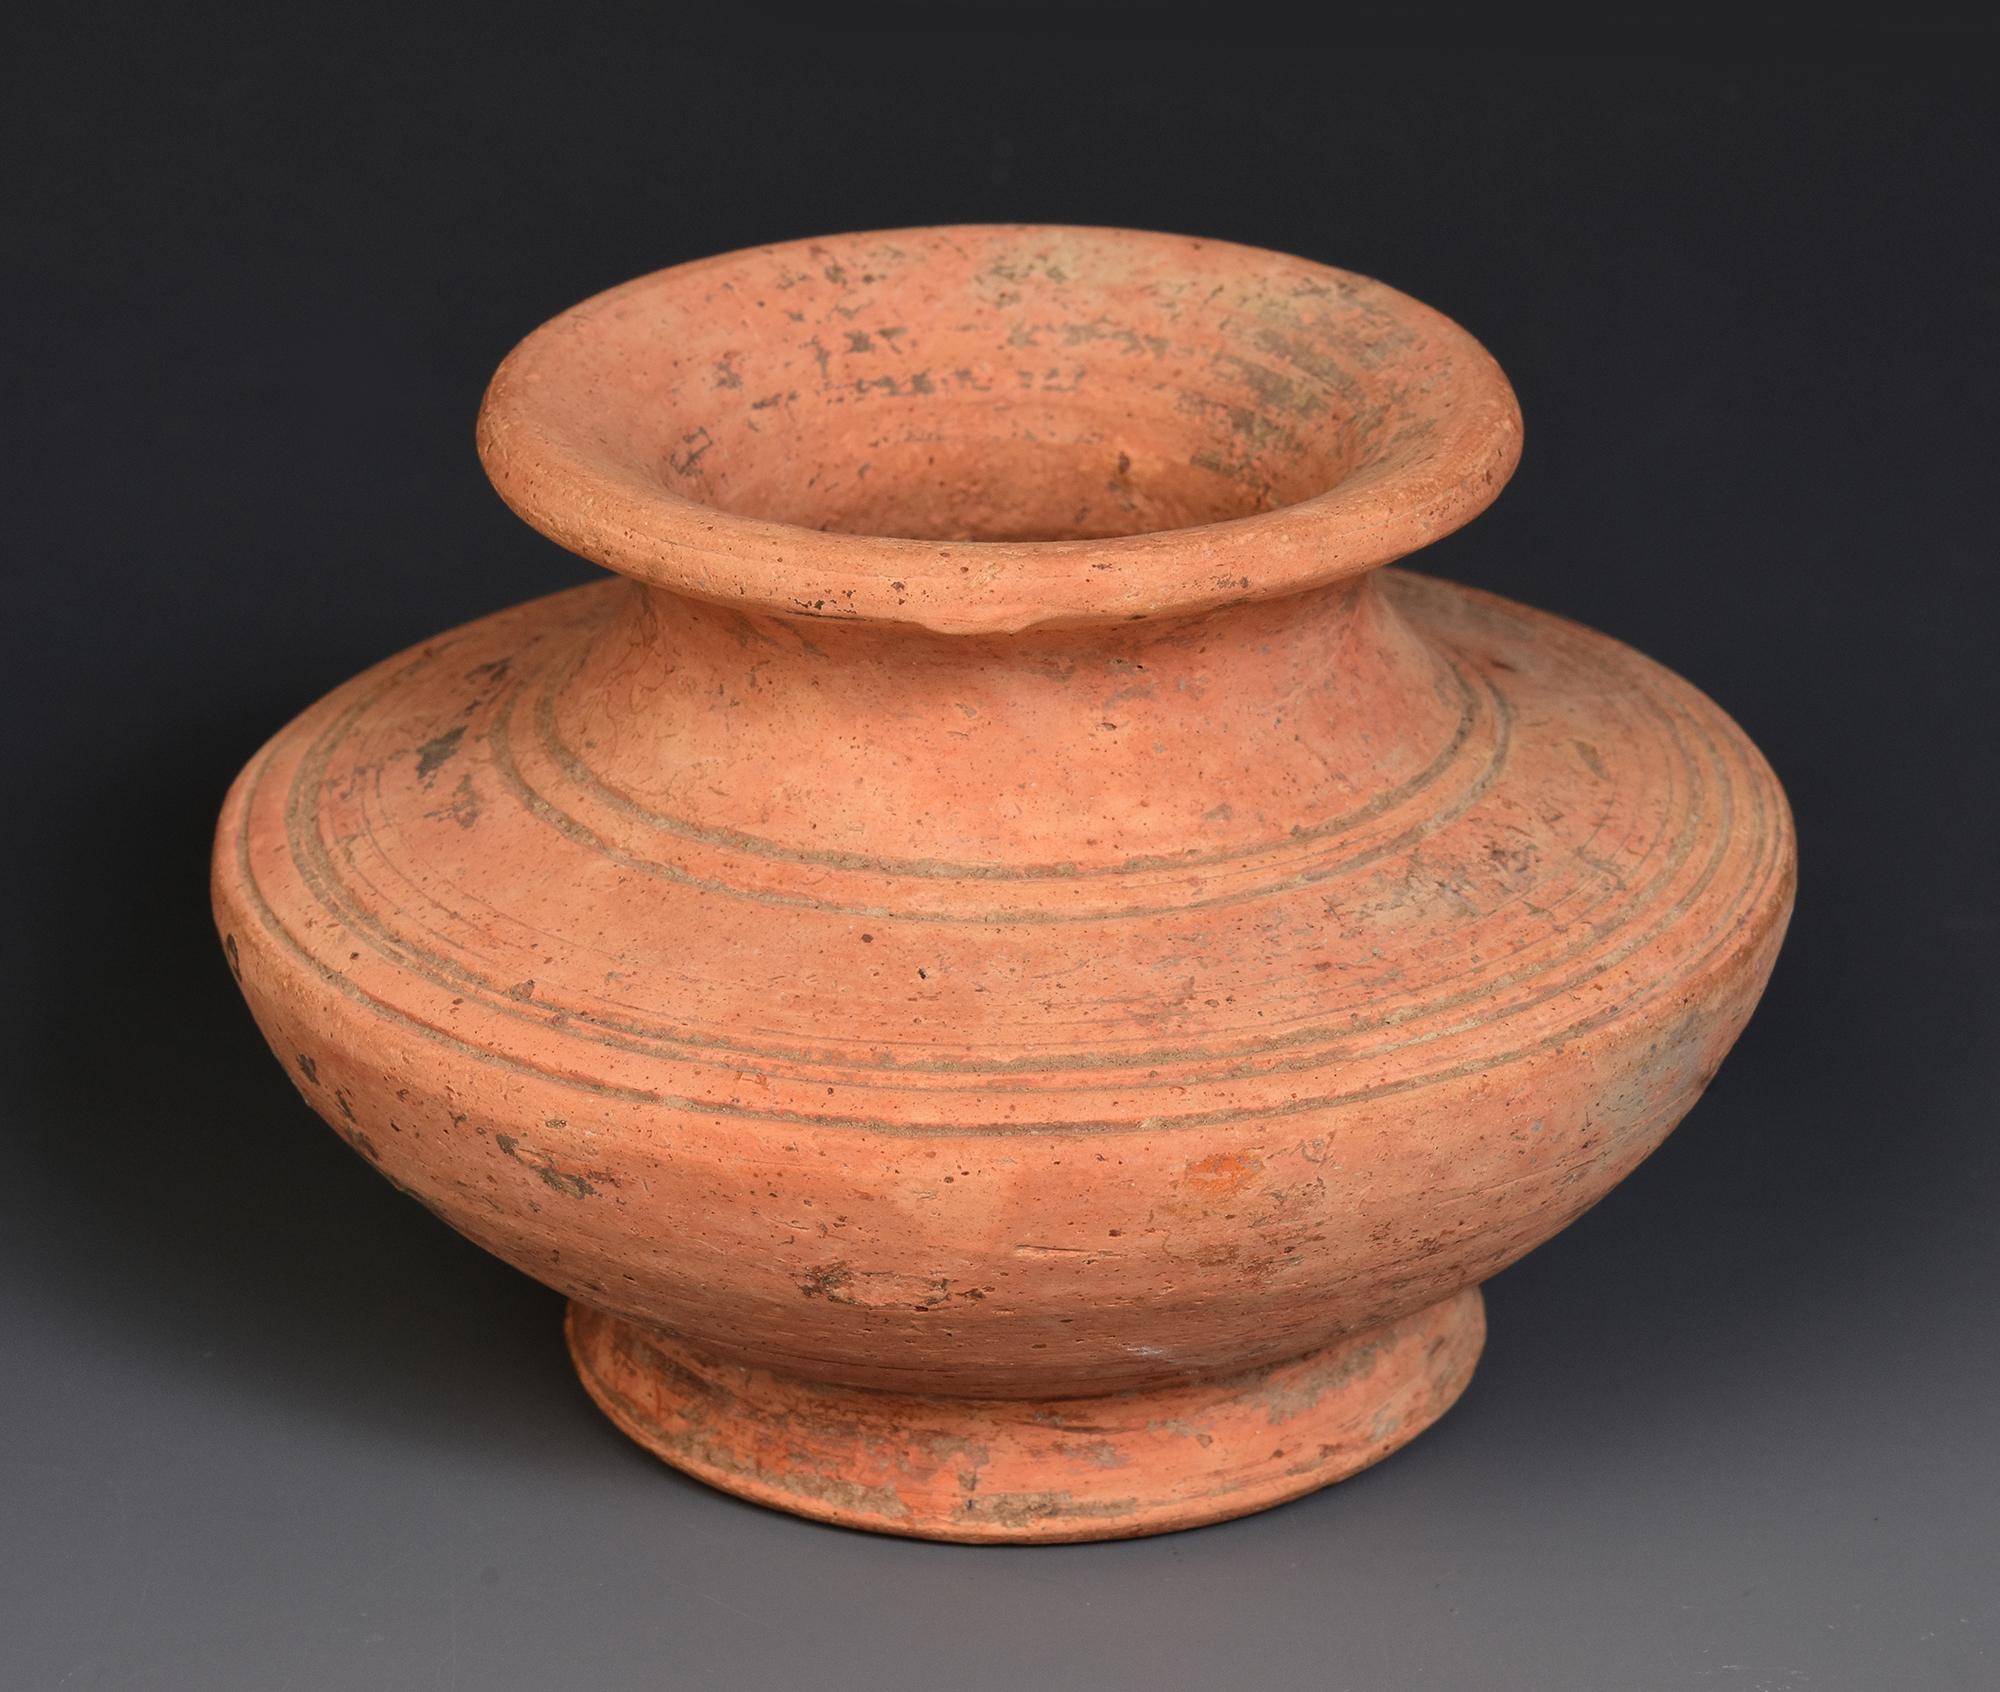 Antique Khmer pottery jar.

Age: Cambodia, Pre-Angkor Period, 6th - 7th Century
Size: Height 7.6 C.M. / Width 11.2 C.M.
Condition: Nice and condition overall (some expected degradation due to its age).

100% satisfaction and authenticity guaranteed